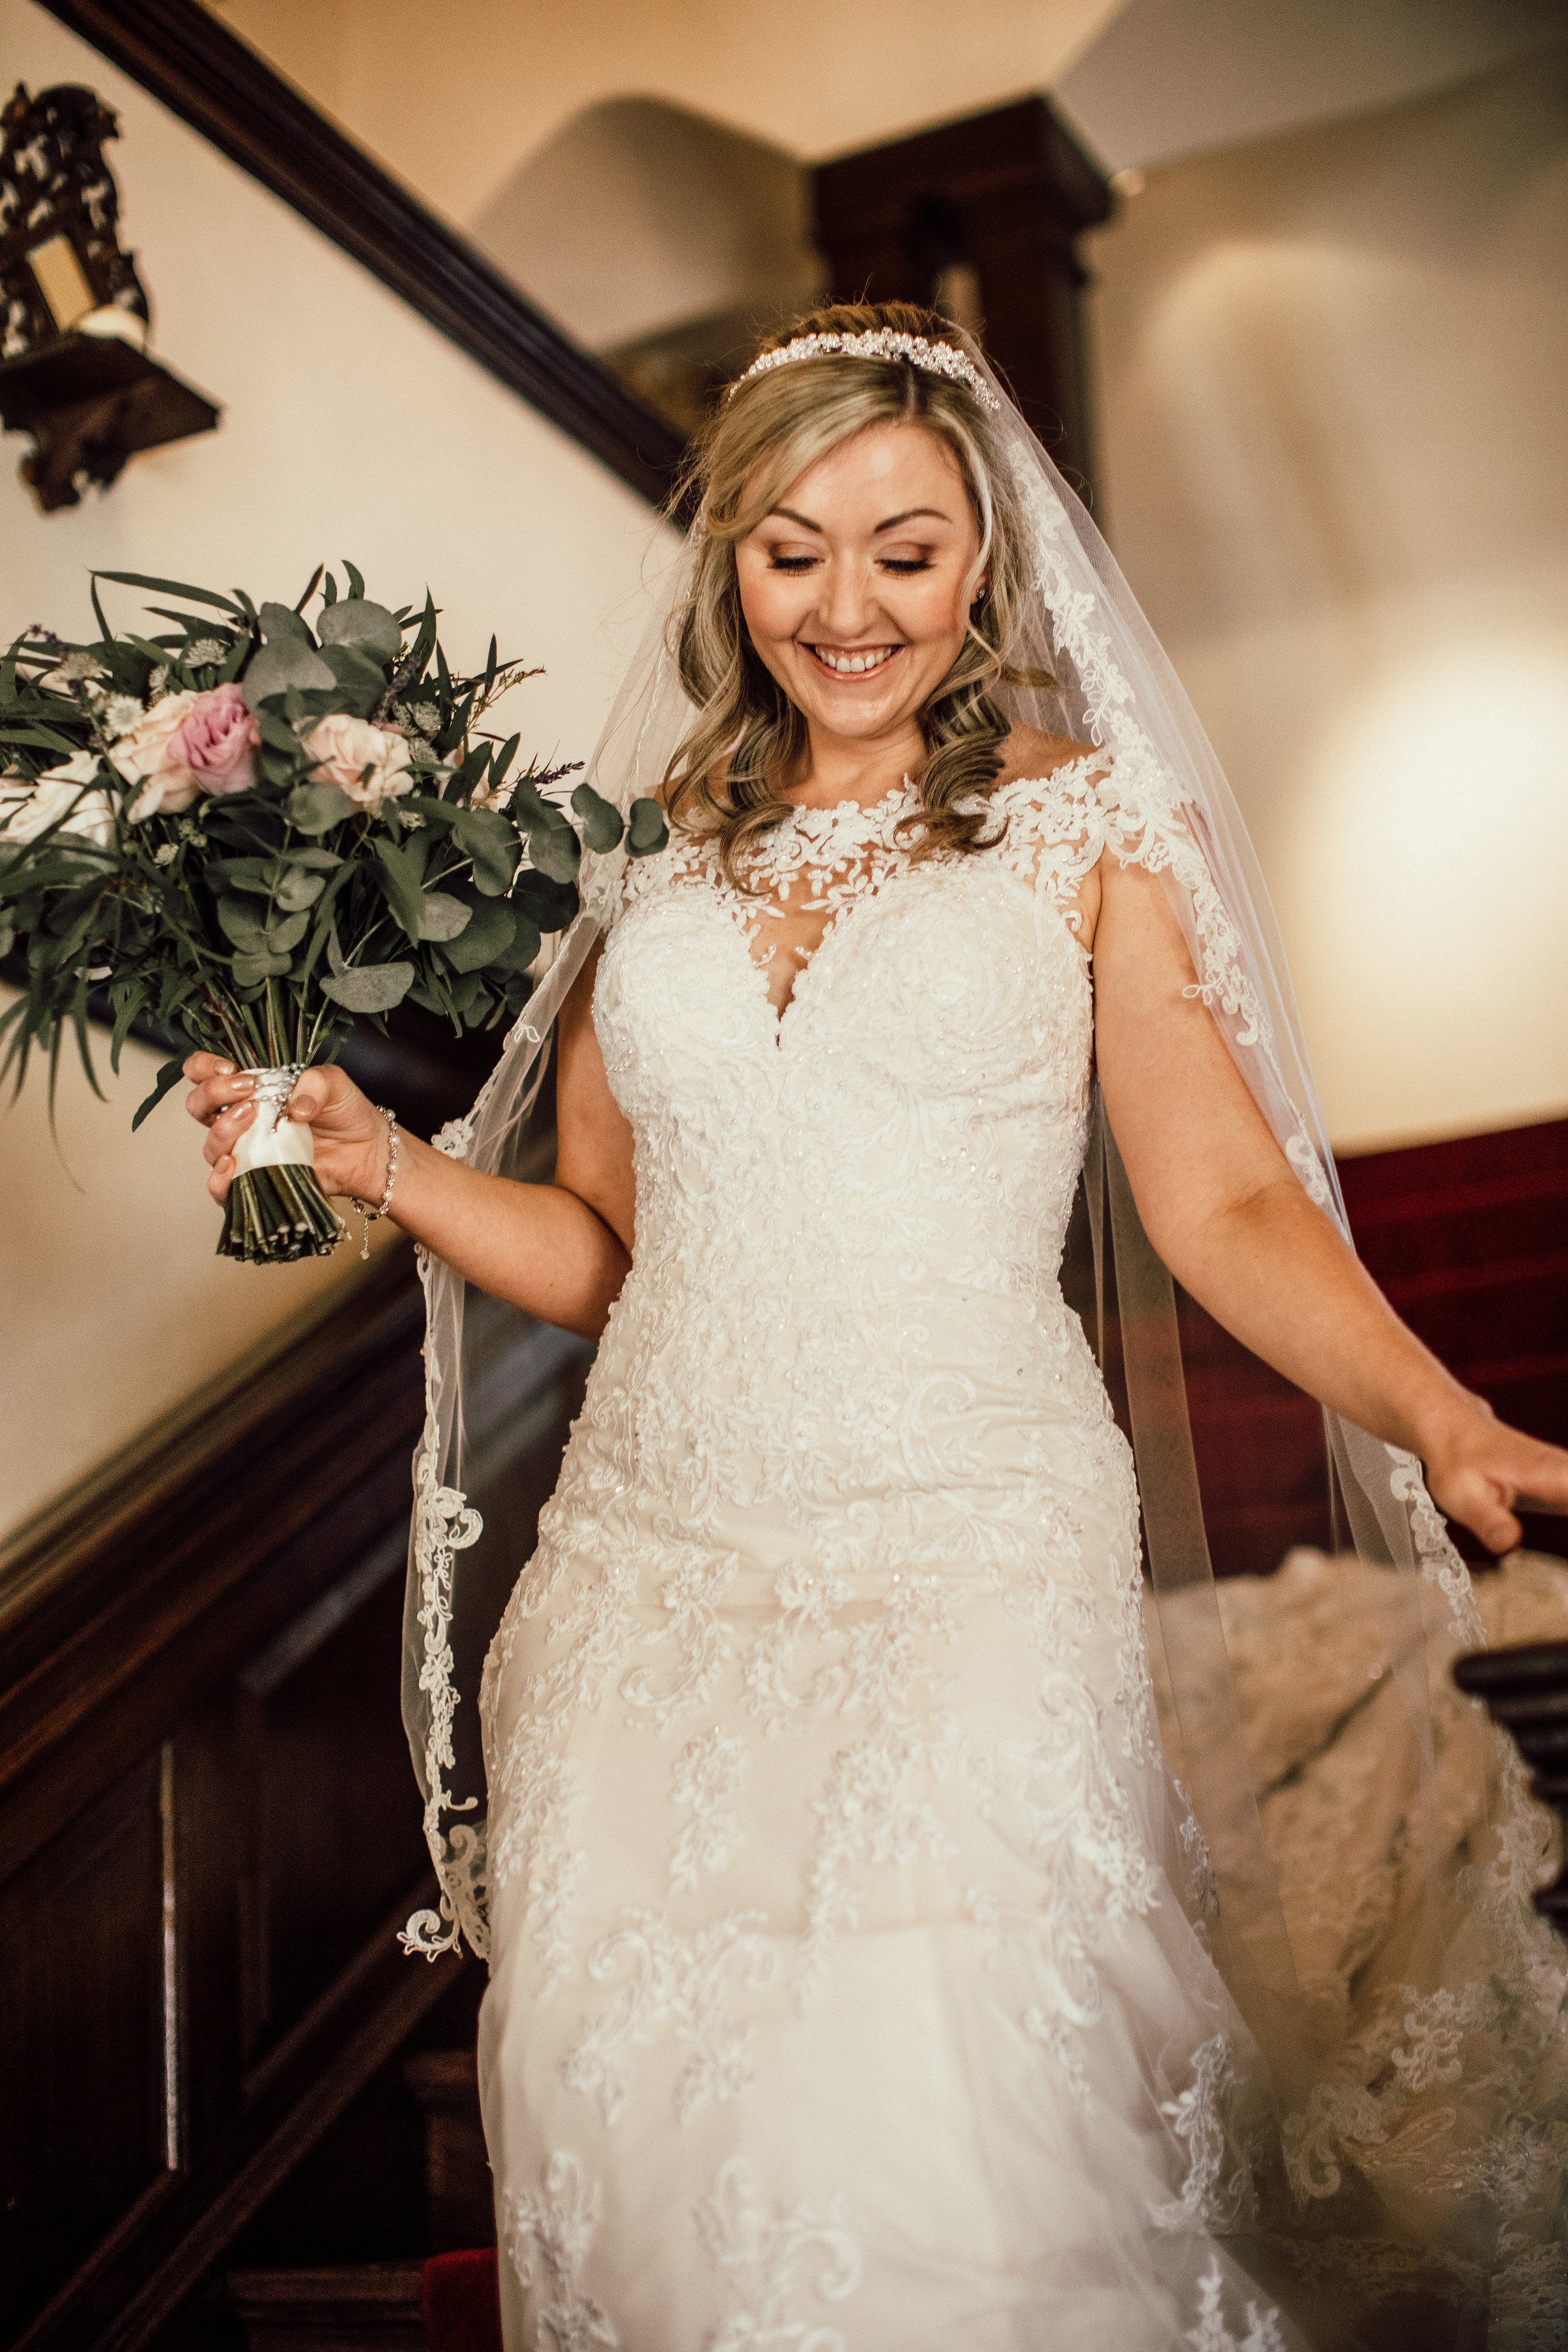 Jane Mather Make Up Artist And Personal Stylist Based In East Sussex Bridal Make Up